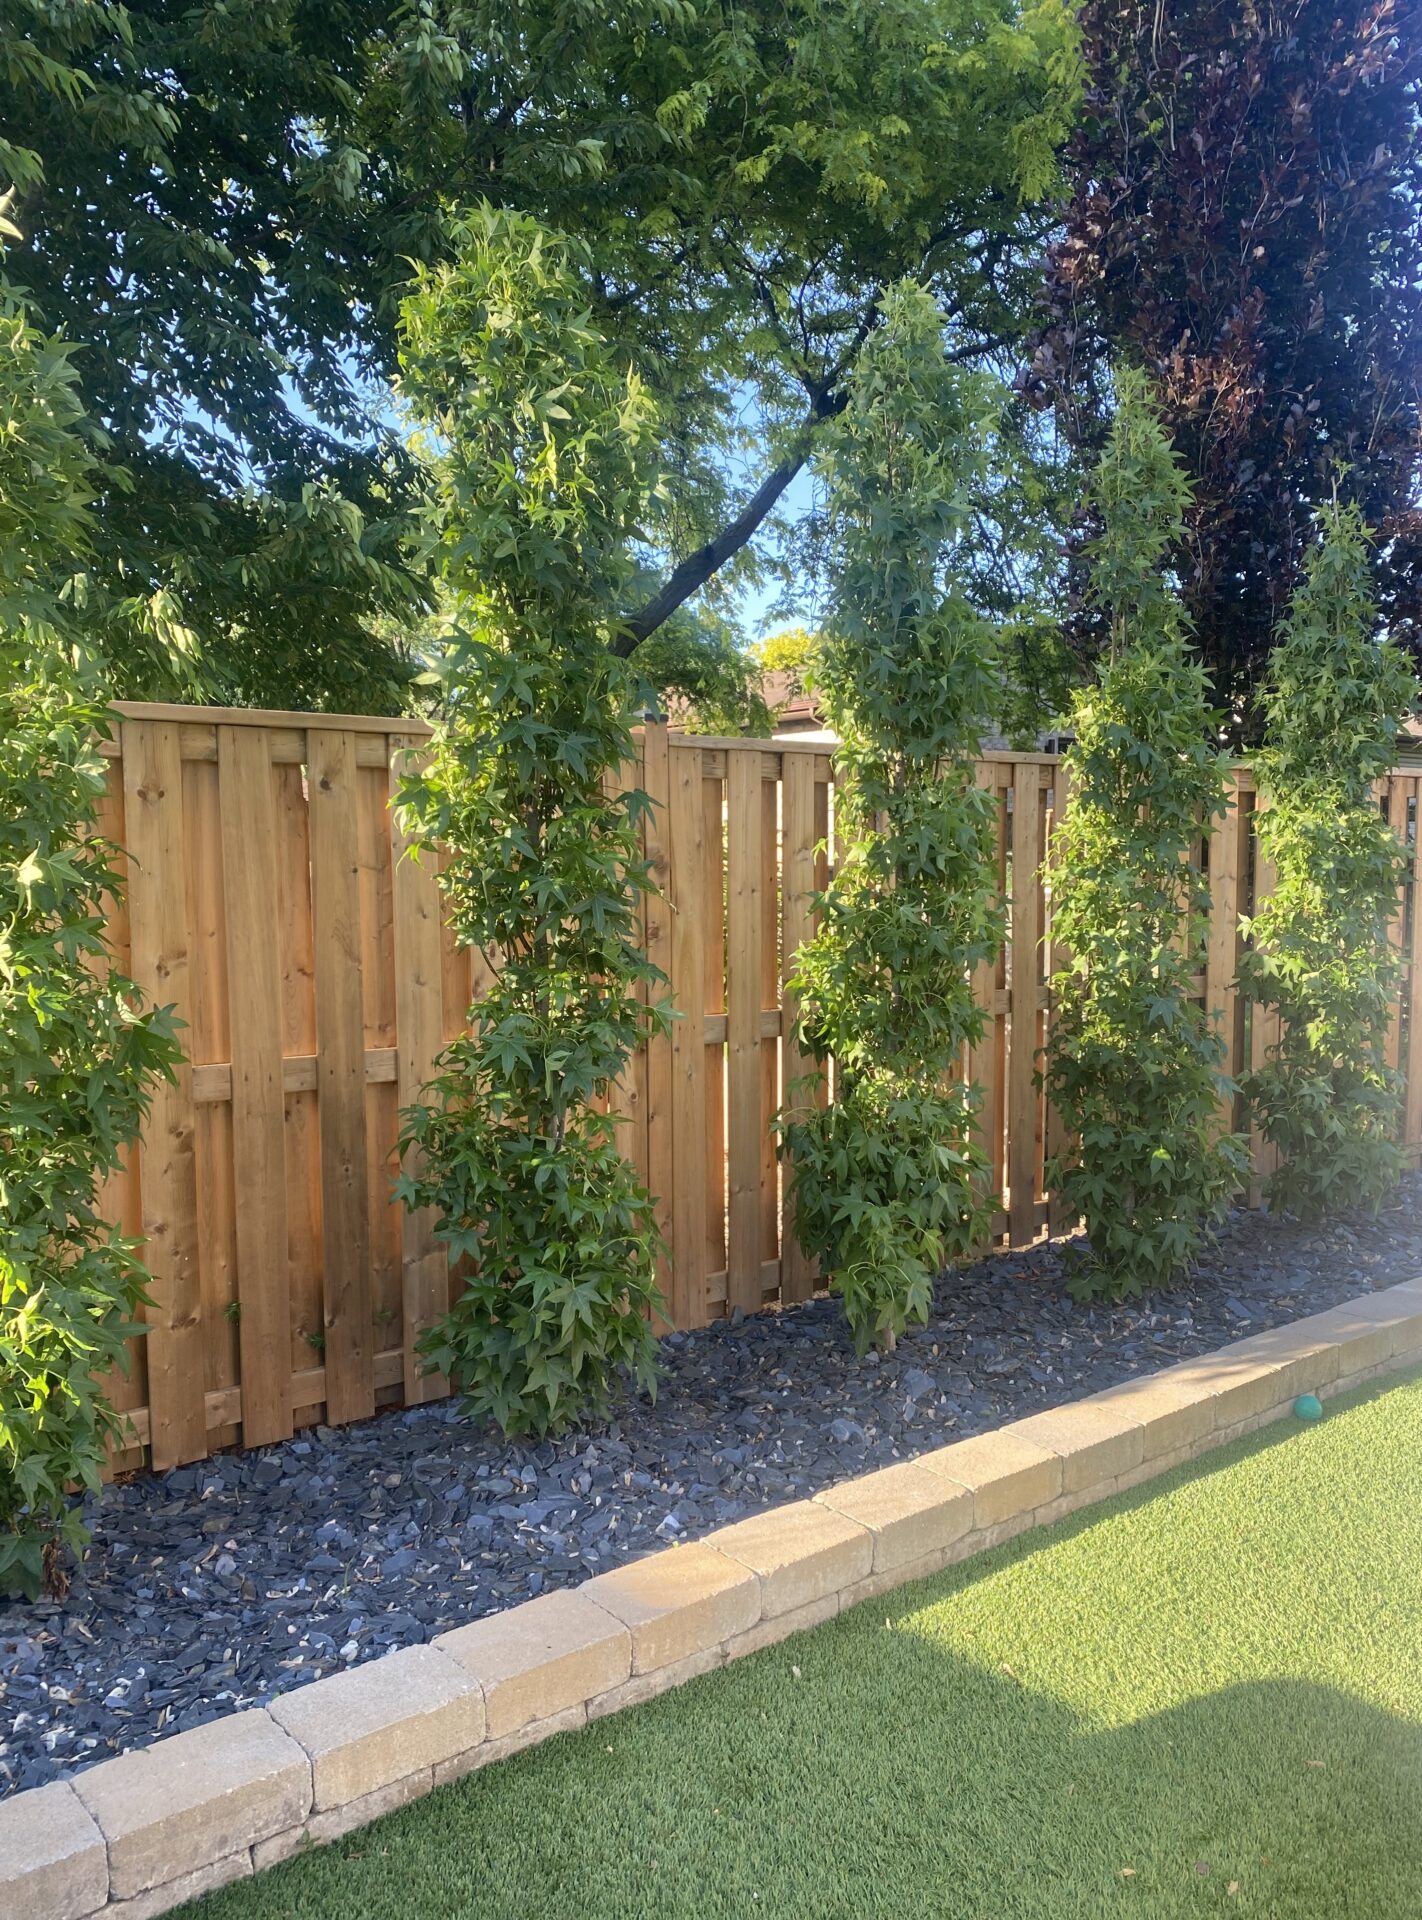 A wooden fence with growing vines is bordered by gray stones, behind which trees with green and maroon leaves overlook artificial turf.